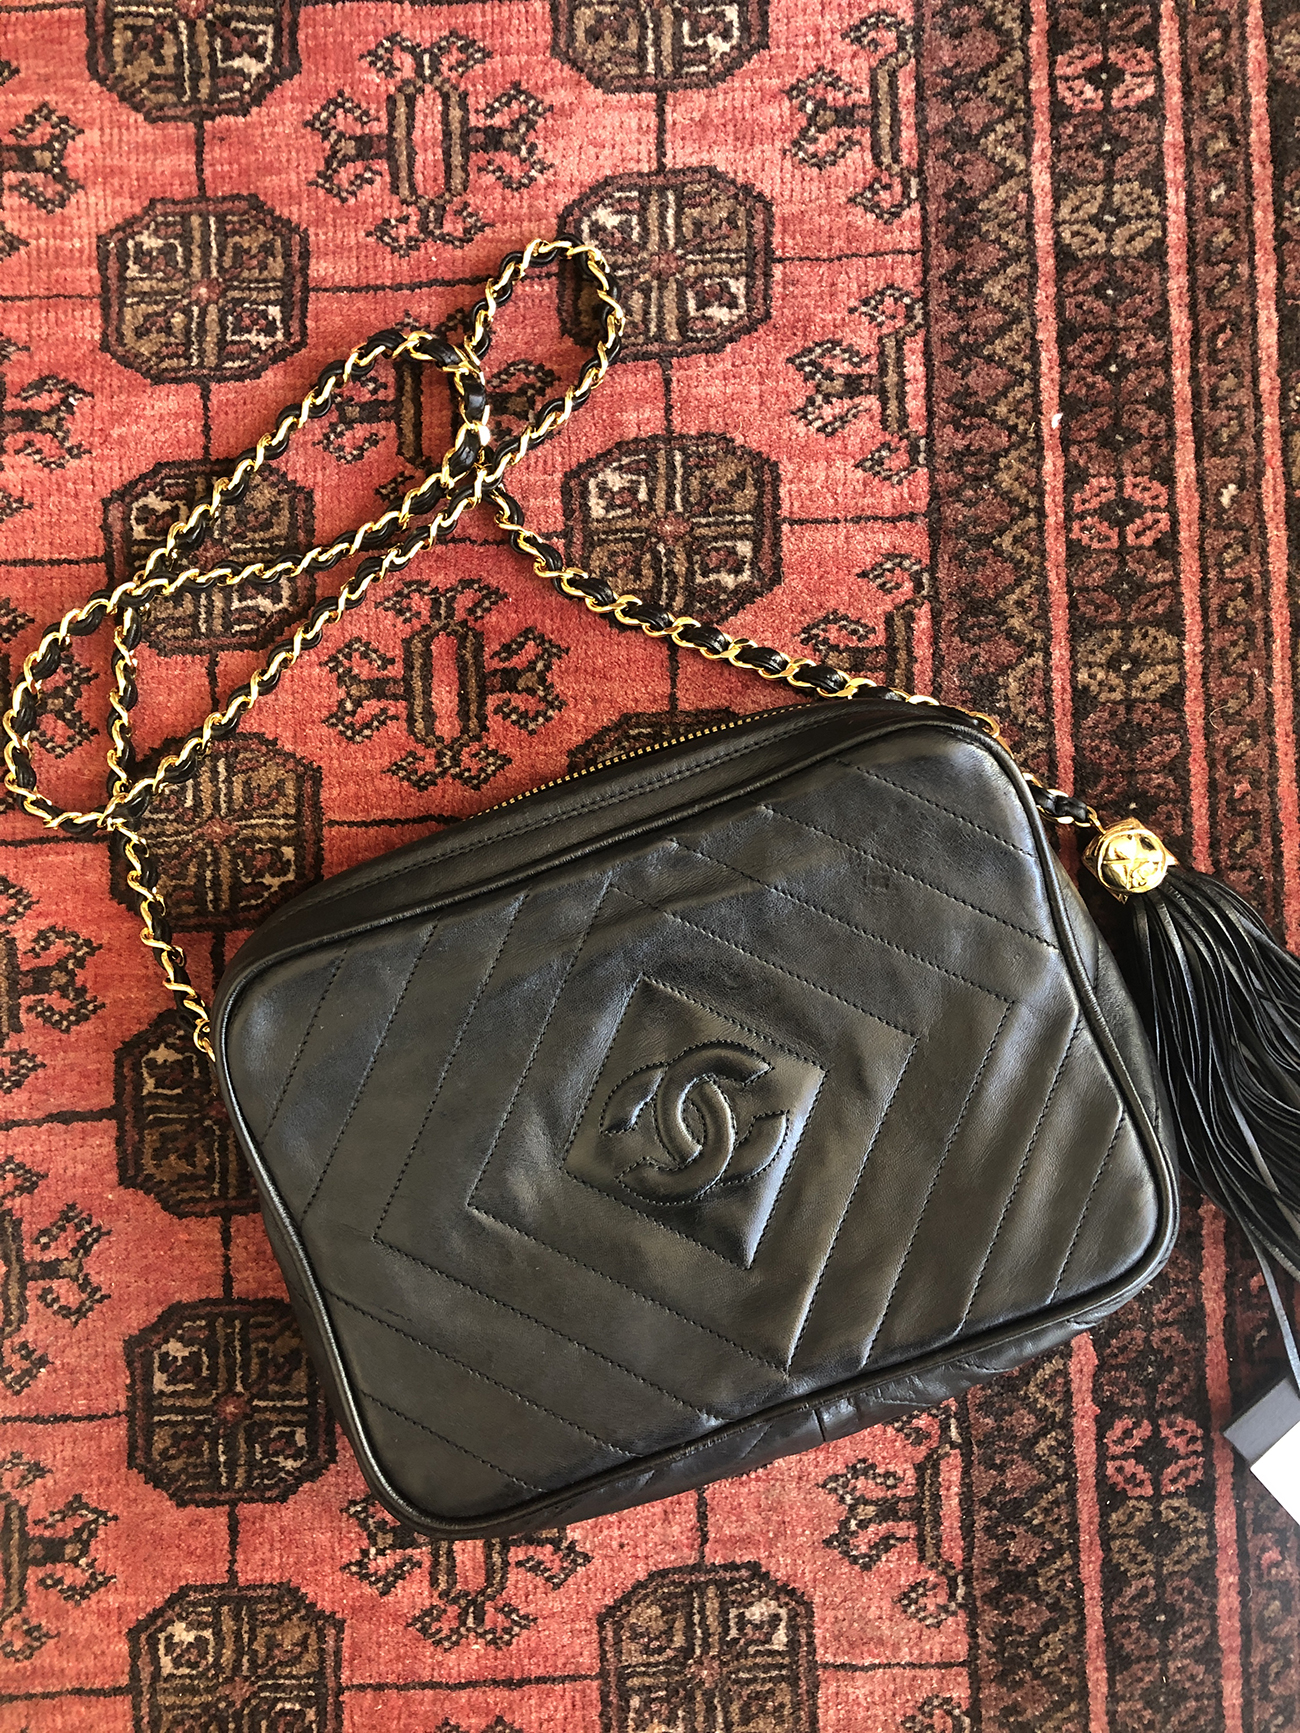 Vintage Chanel bag repair & restoration review  Leather Surgeons before &  after for chain hardware 